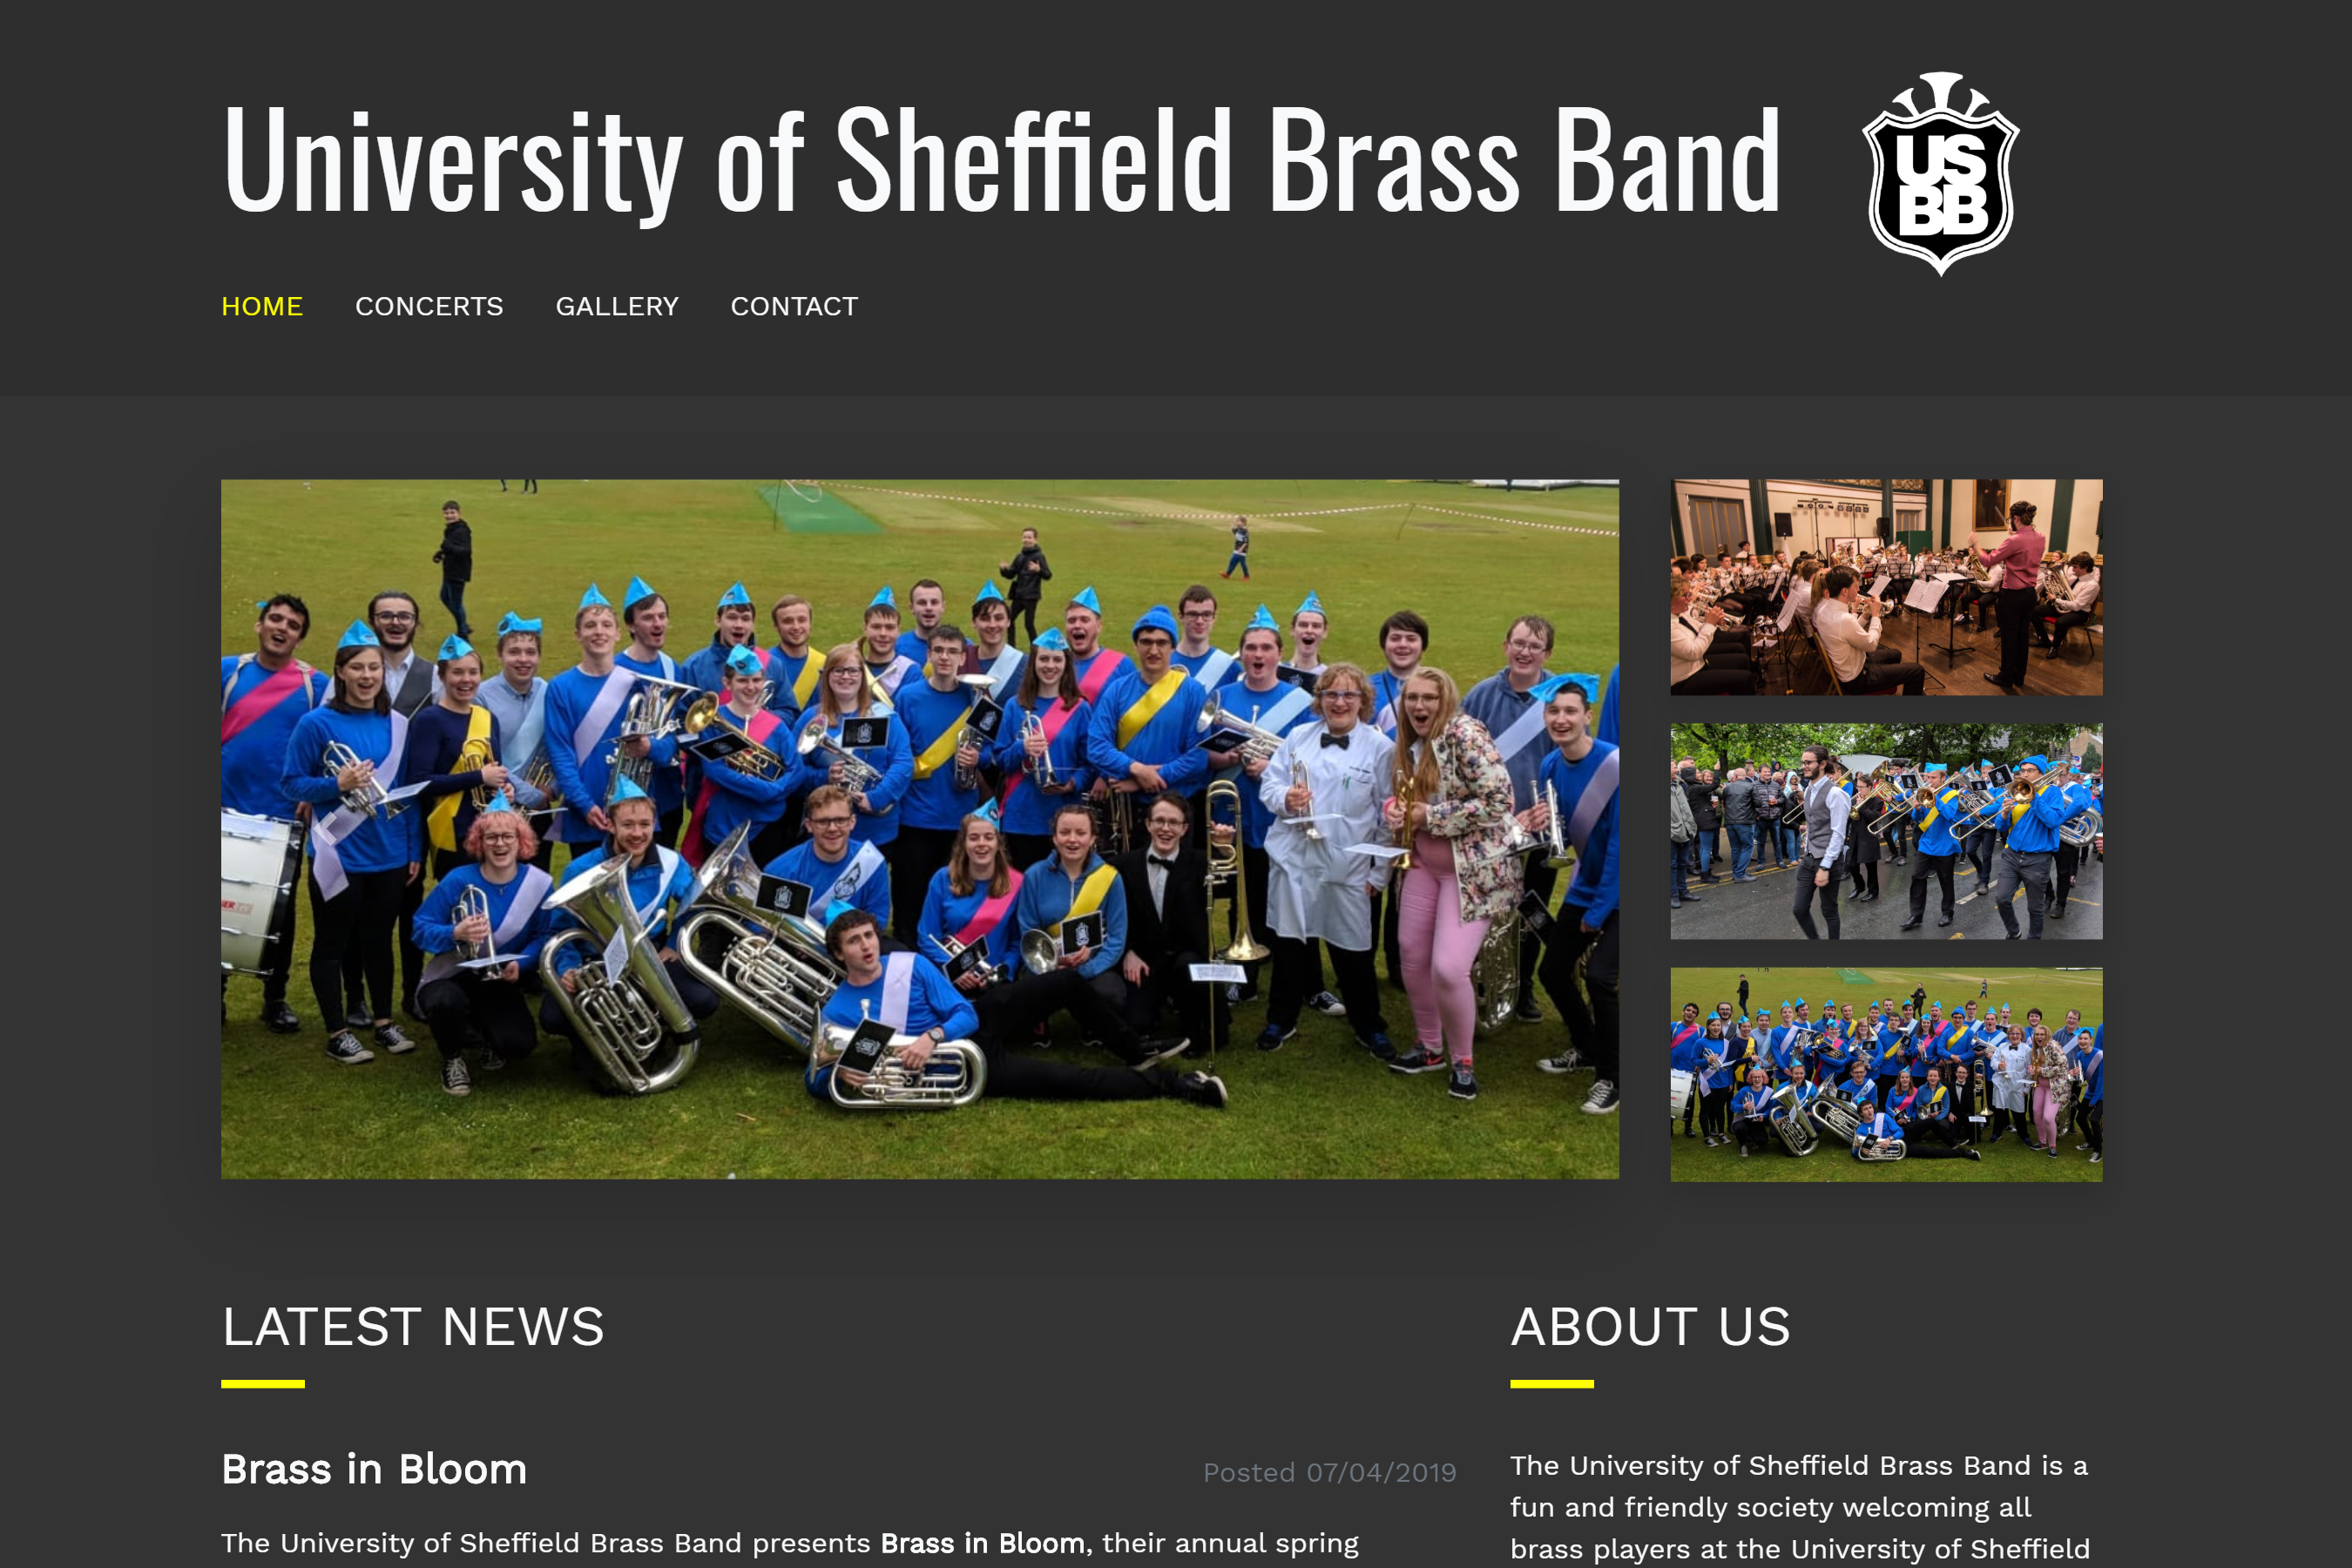 Screenshot of the home page of USBB's website